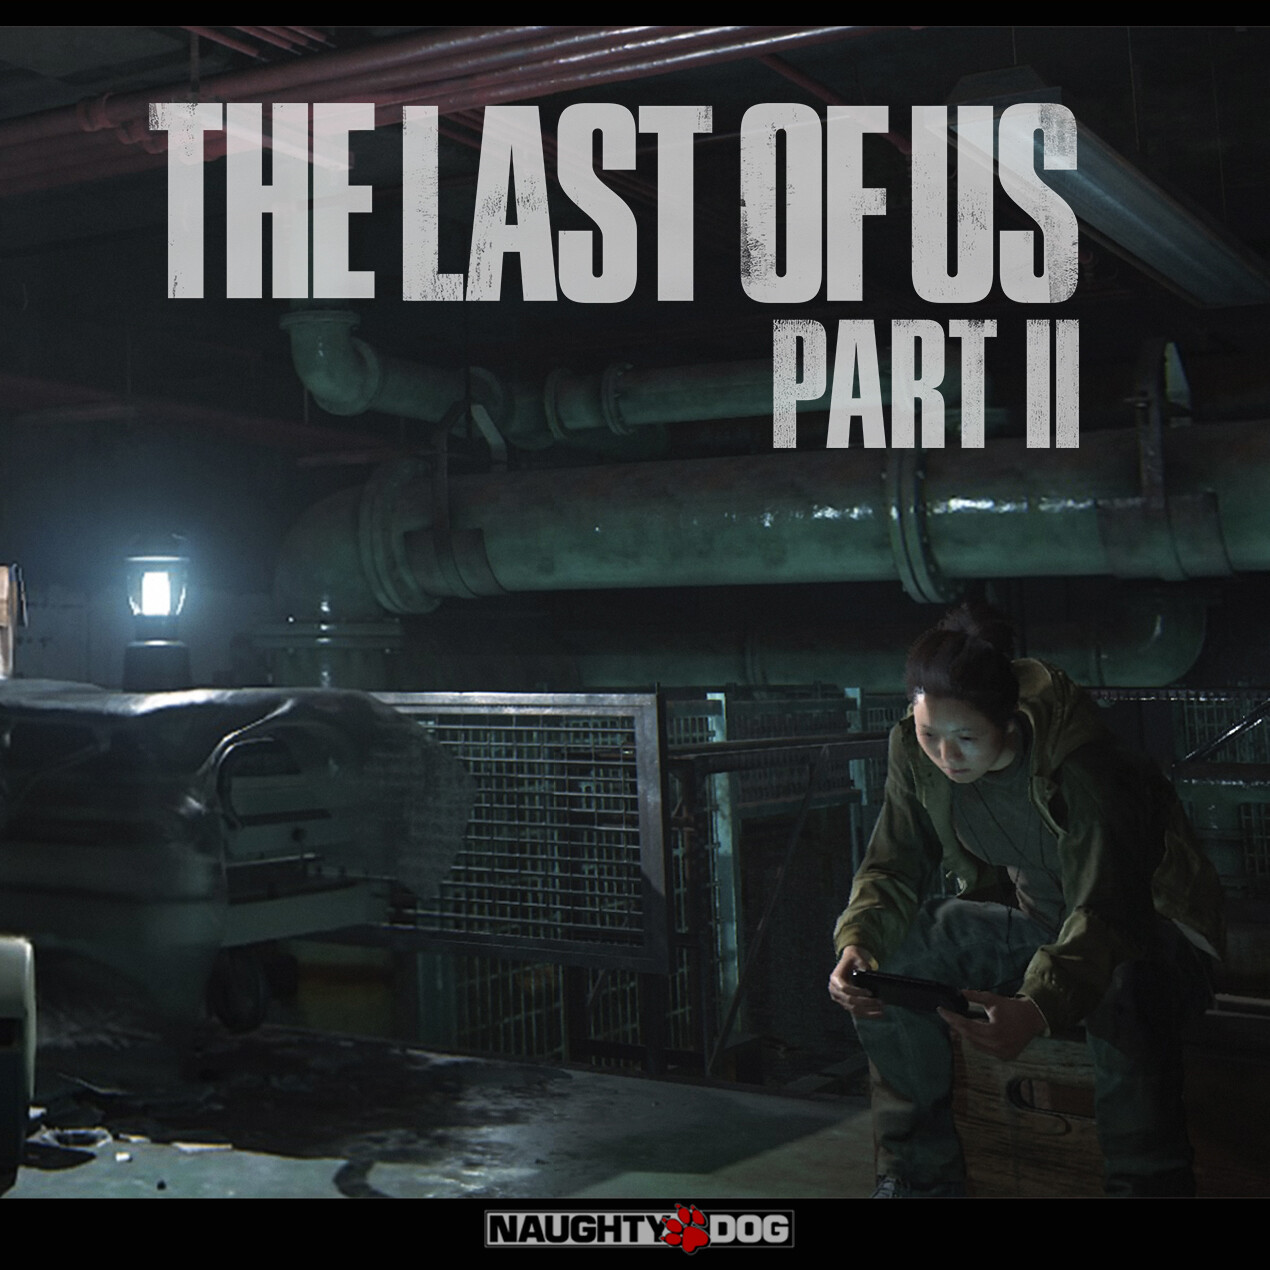 The Last of Us Part II: how Naughty Dog made a classic amidst catastrophe